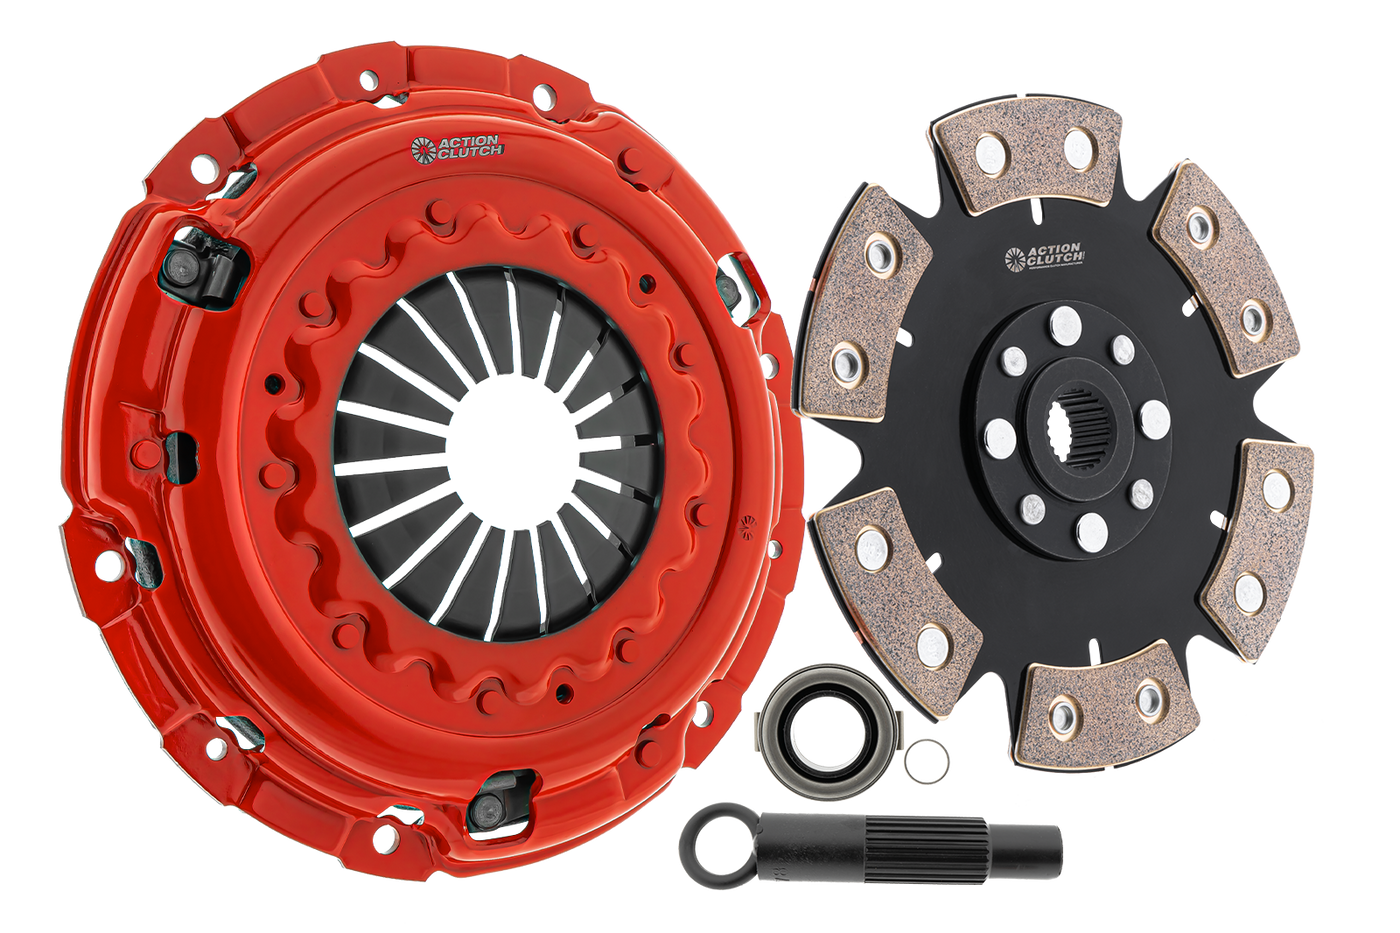 Stage 4 Clutch Kit (1MD) for Nissan 350Z 2007-2008 3.5L (VQ35HR) Without Heavy Duty Concentric Slave Cylinder